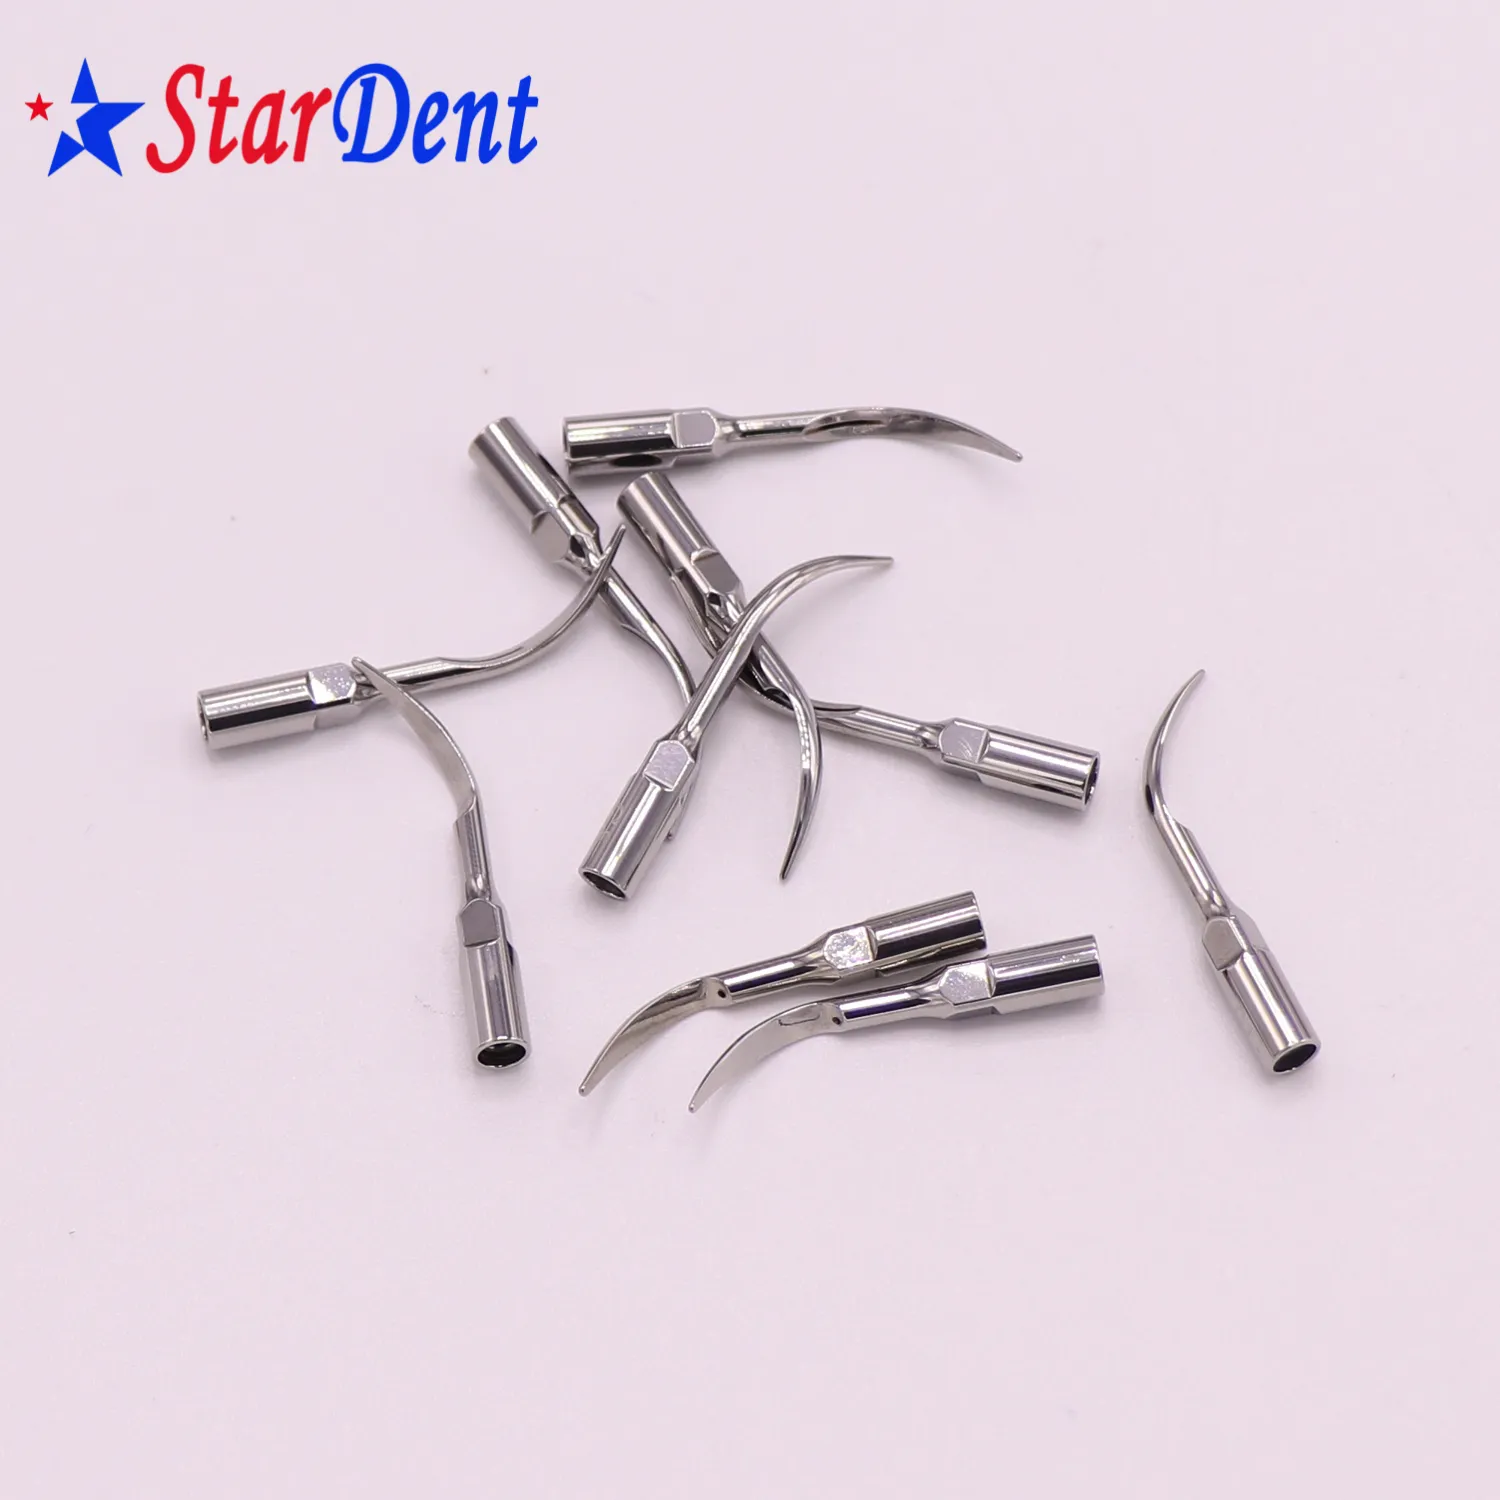 Whosale Dental Scaler Material Ultrasonic Scaler Tips Metal Tips Spare Part of Scaler